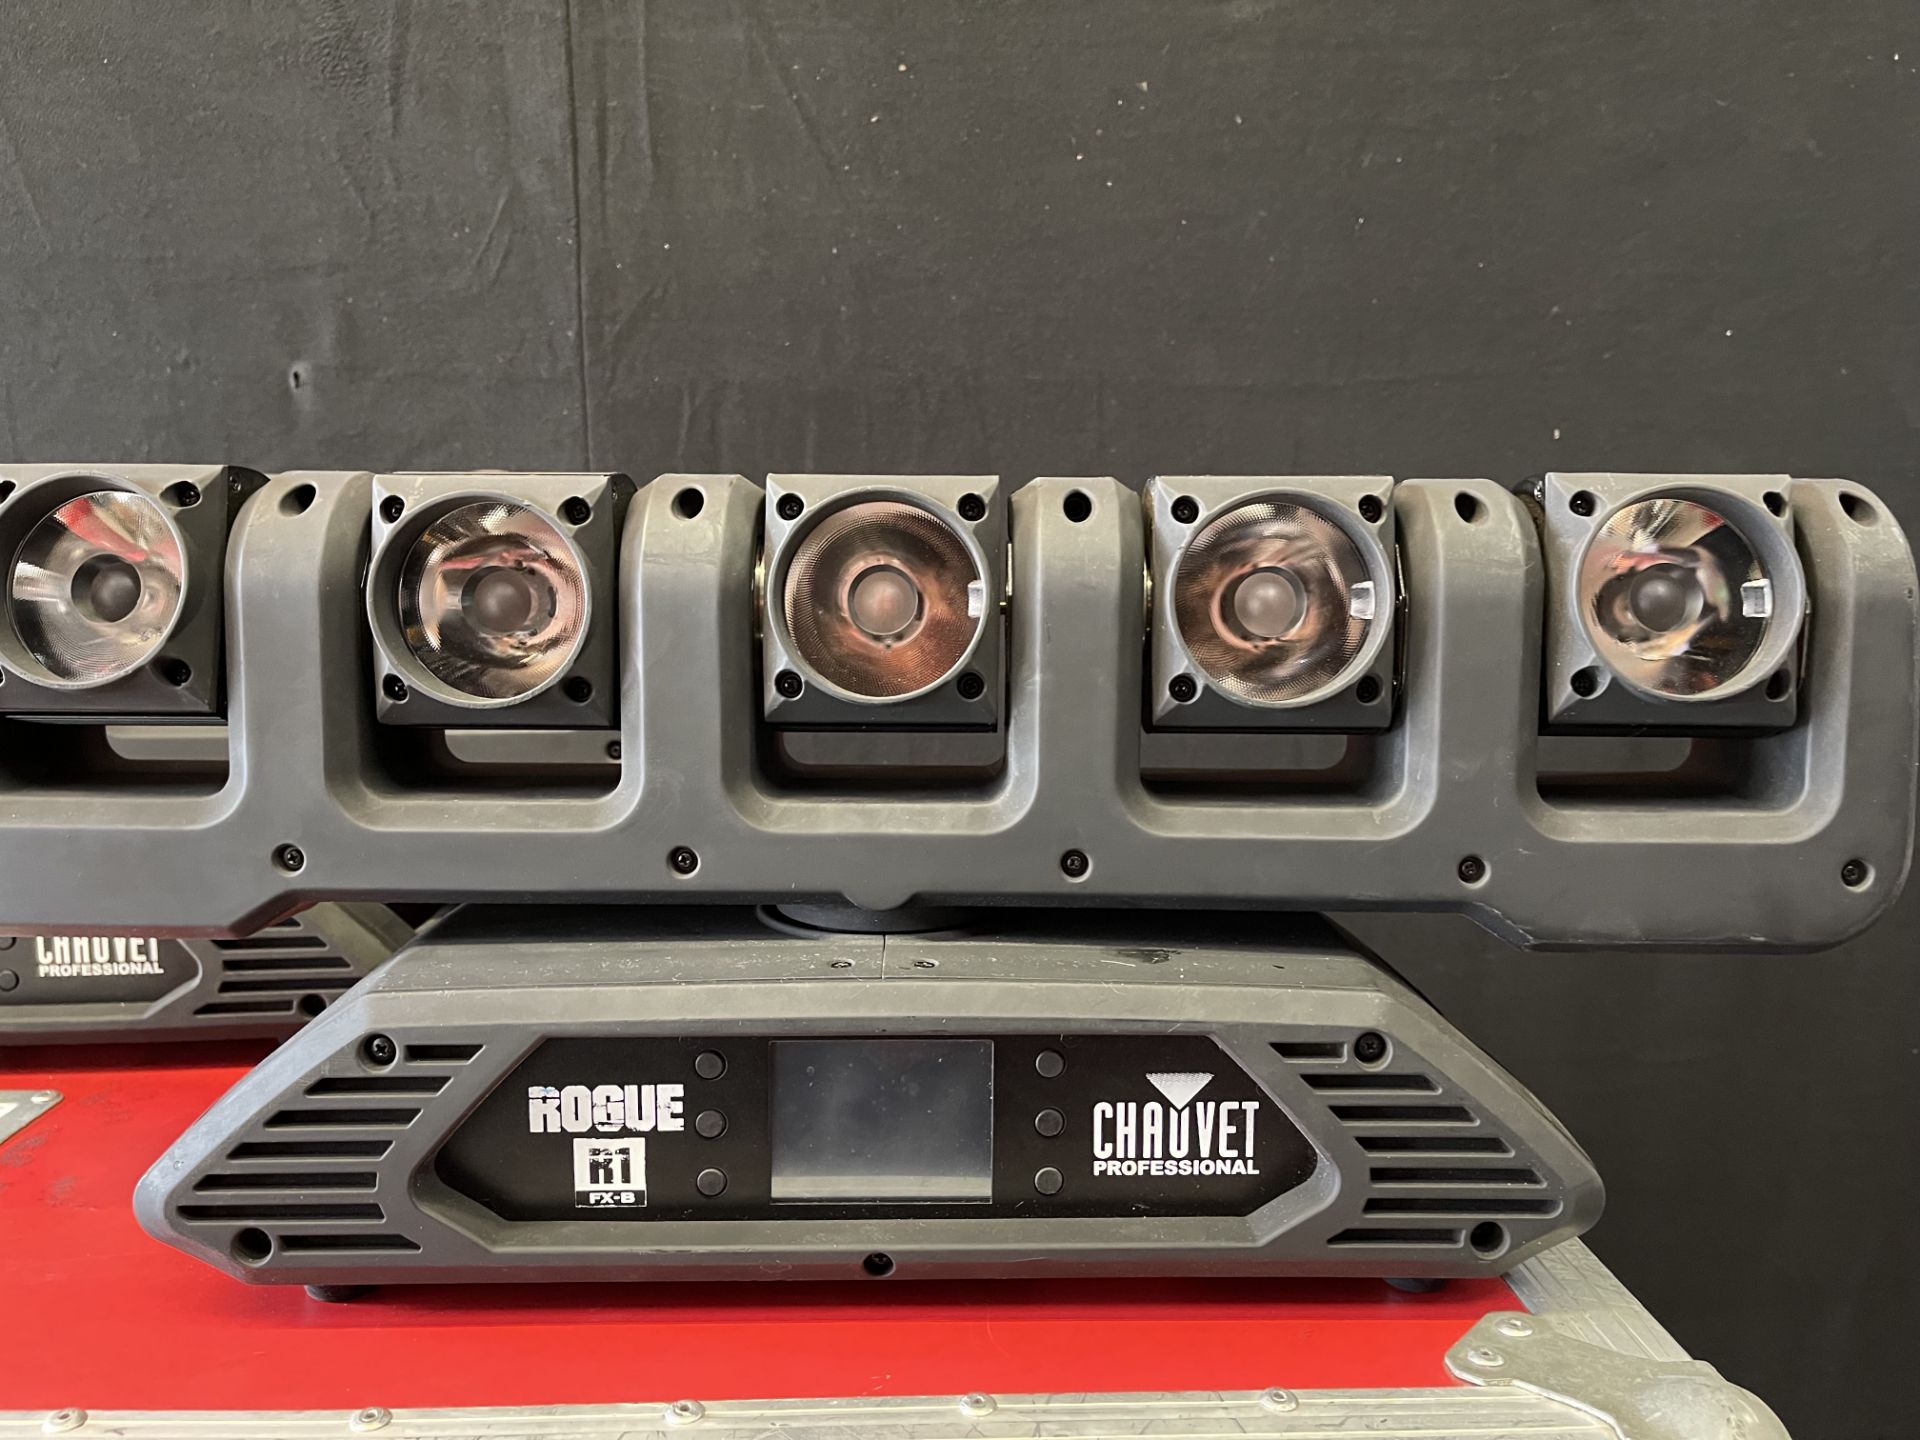 A Set of 4 Chauvet Rogue R1 FX-B Moving Head Lights, good condition, tested and working with - Image 2 of 6